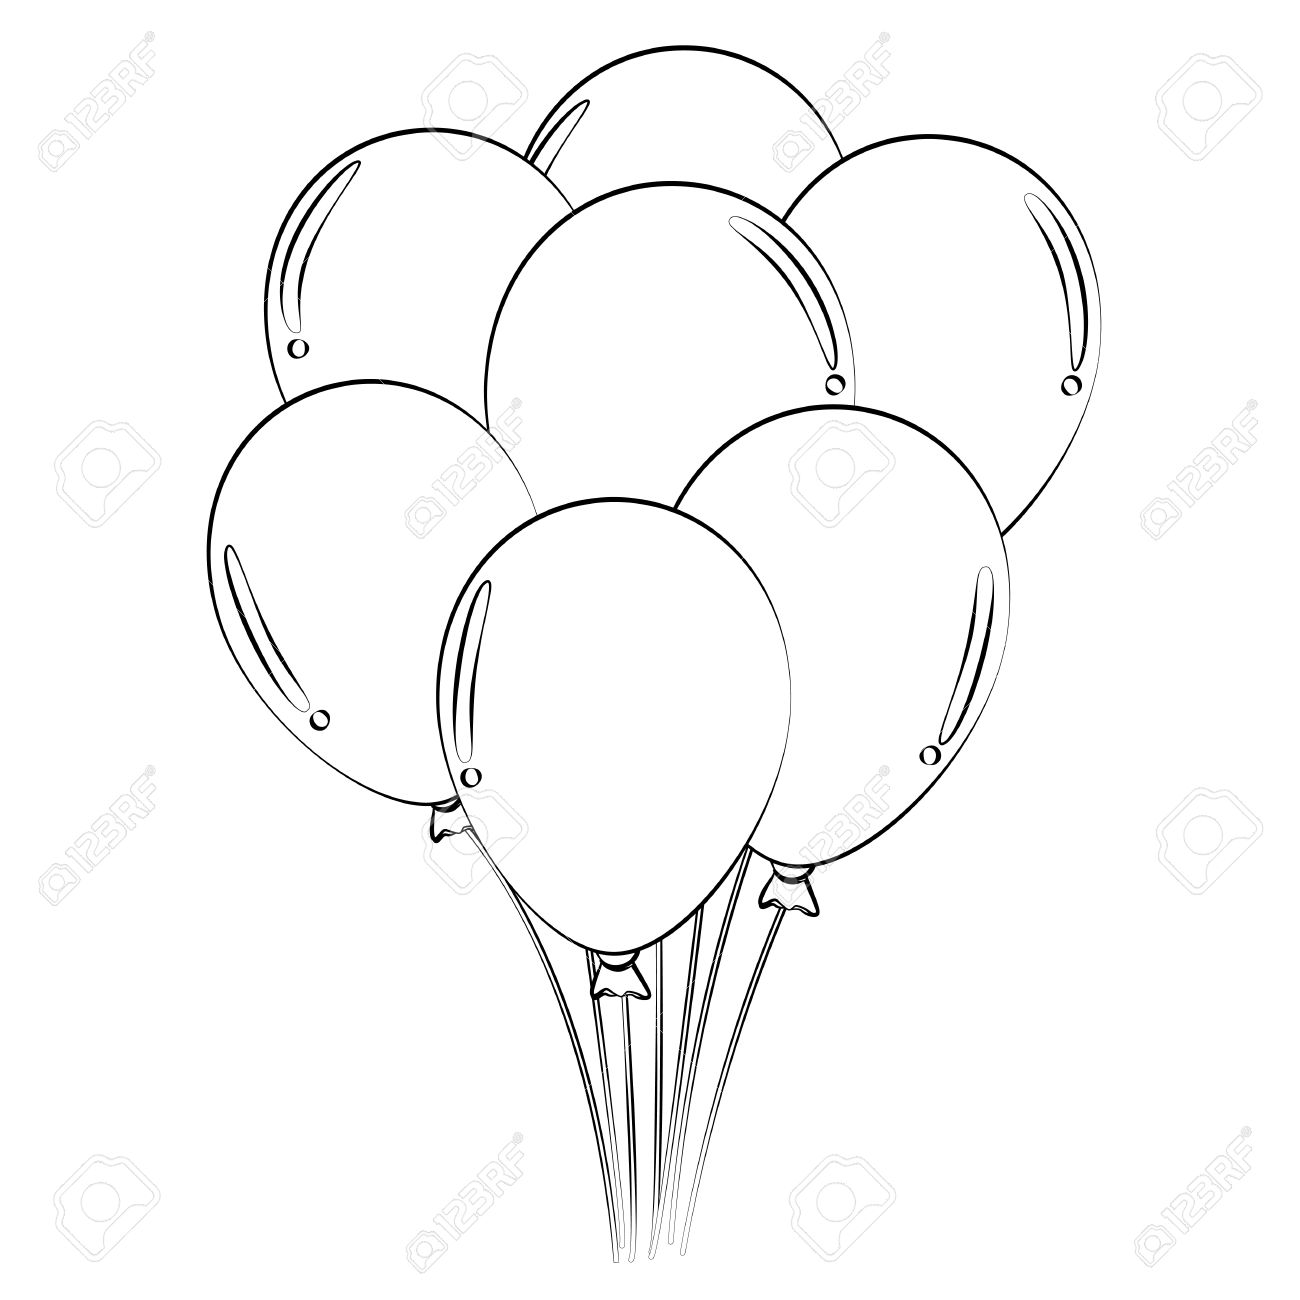 Line Drawing Of Balloons at GetDrawings Free download